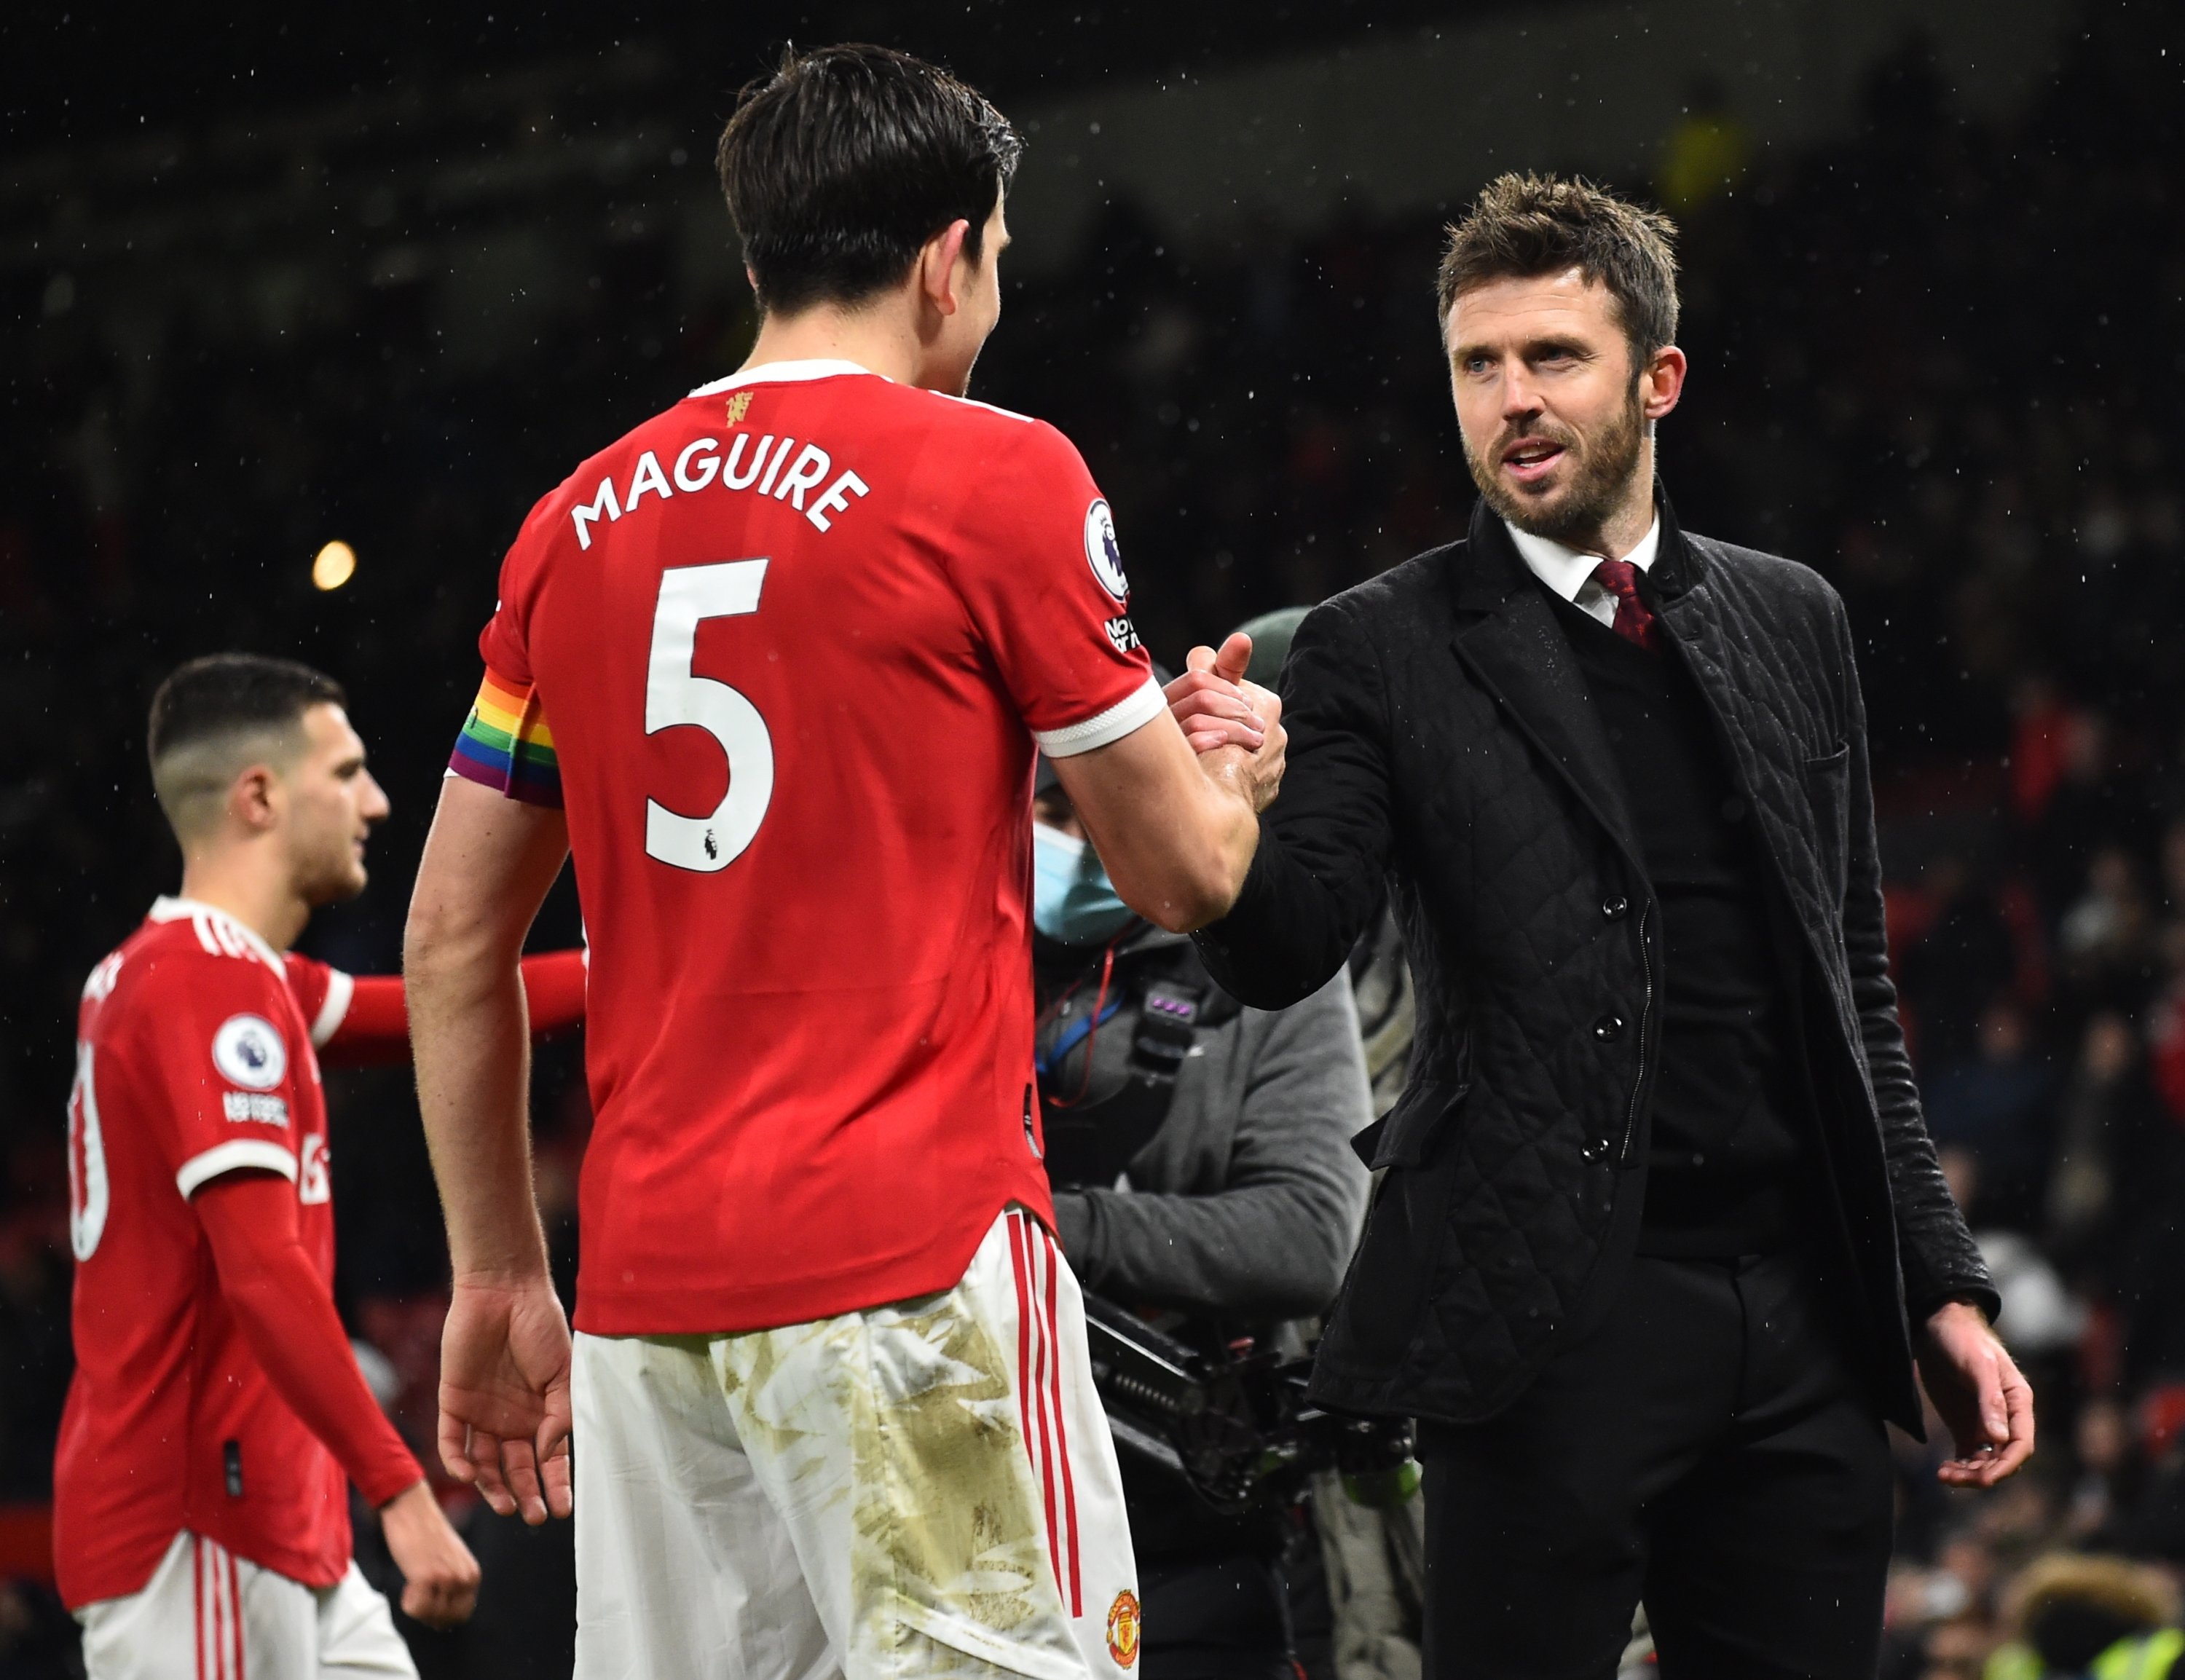 Manchester United's Harry Maguire (L) celebrates with manager Michael Carrick (R) after the English Premier League soccer match against Arsenal at Old Trafford in Manchester, England, Dec. 2, 2021. (AFP Photo)